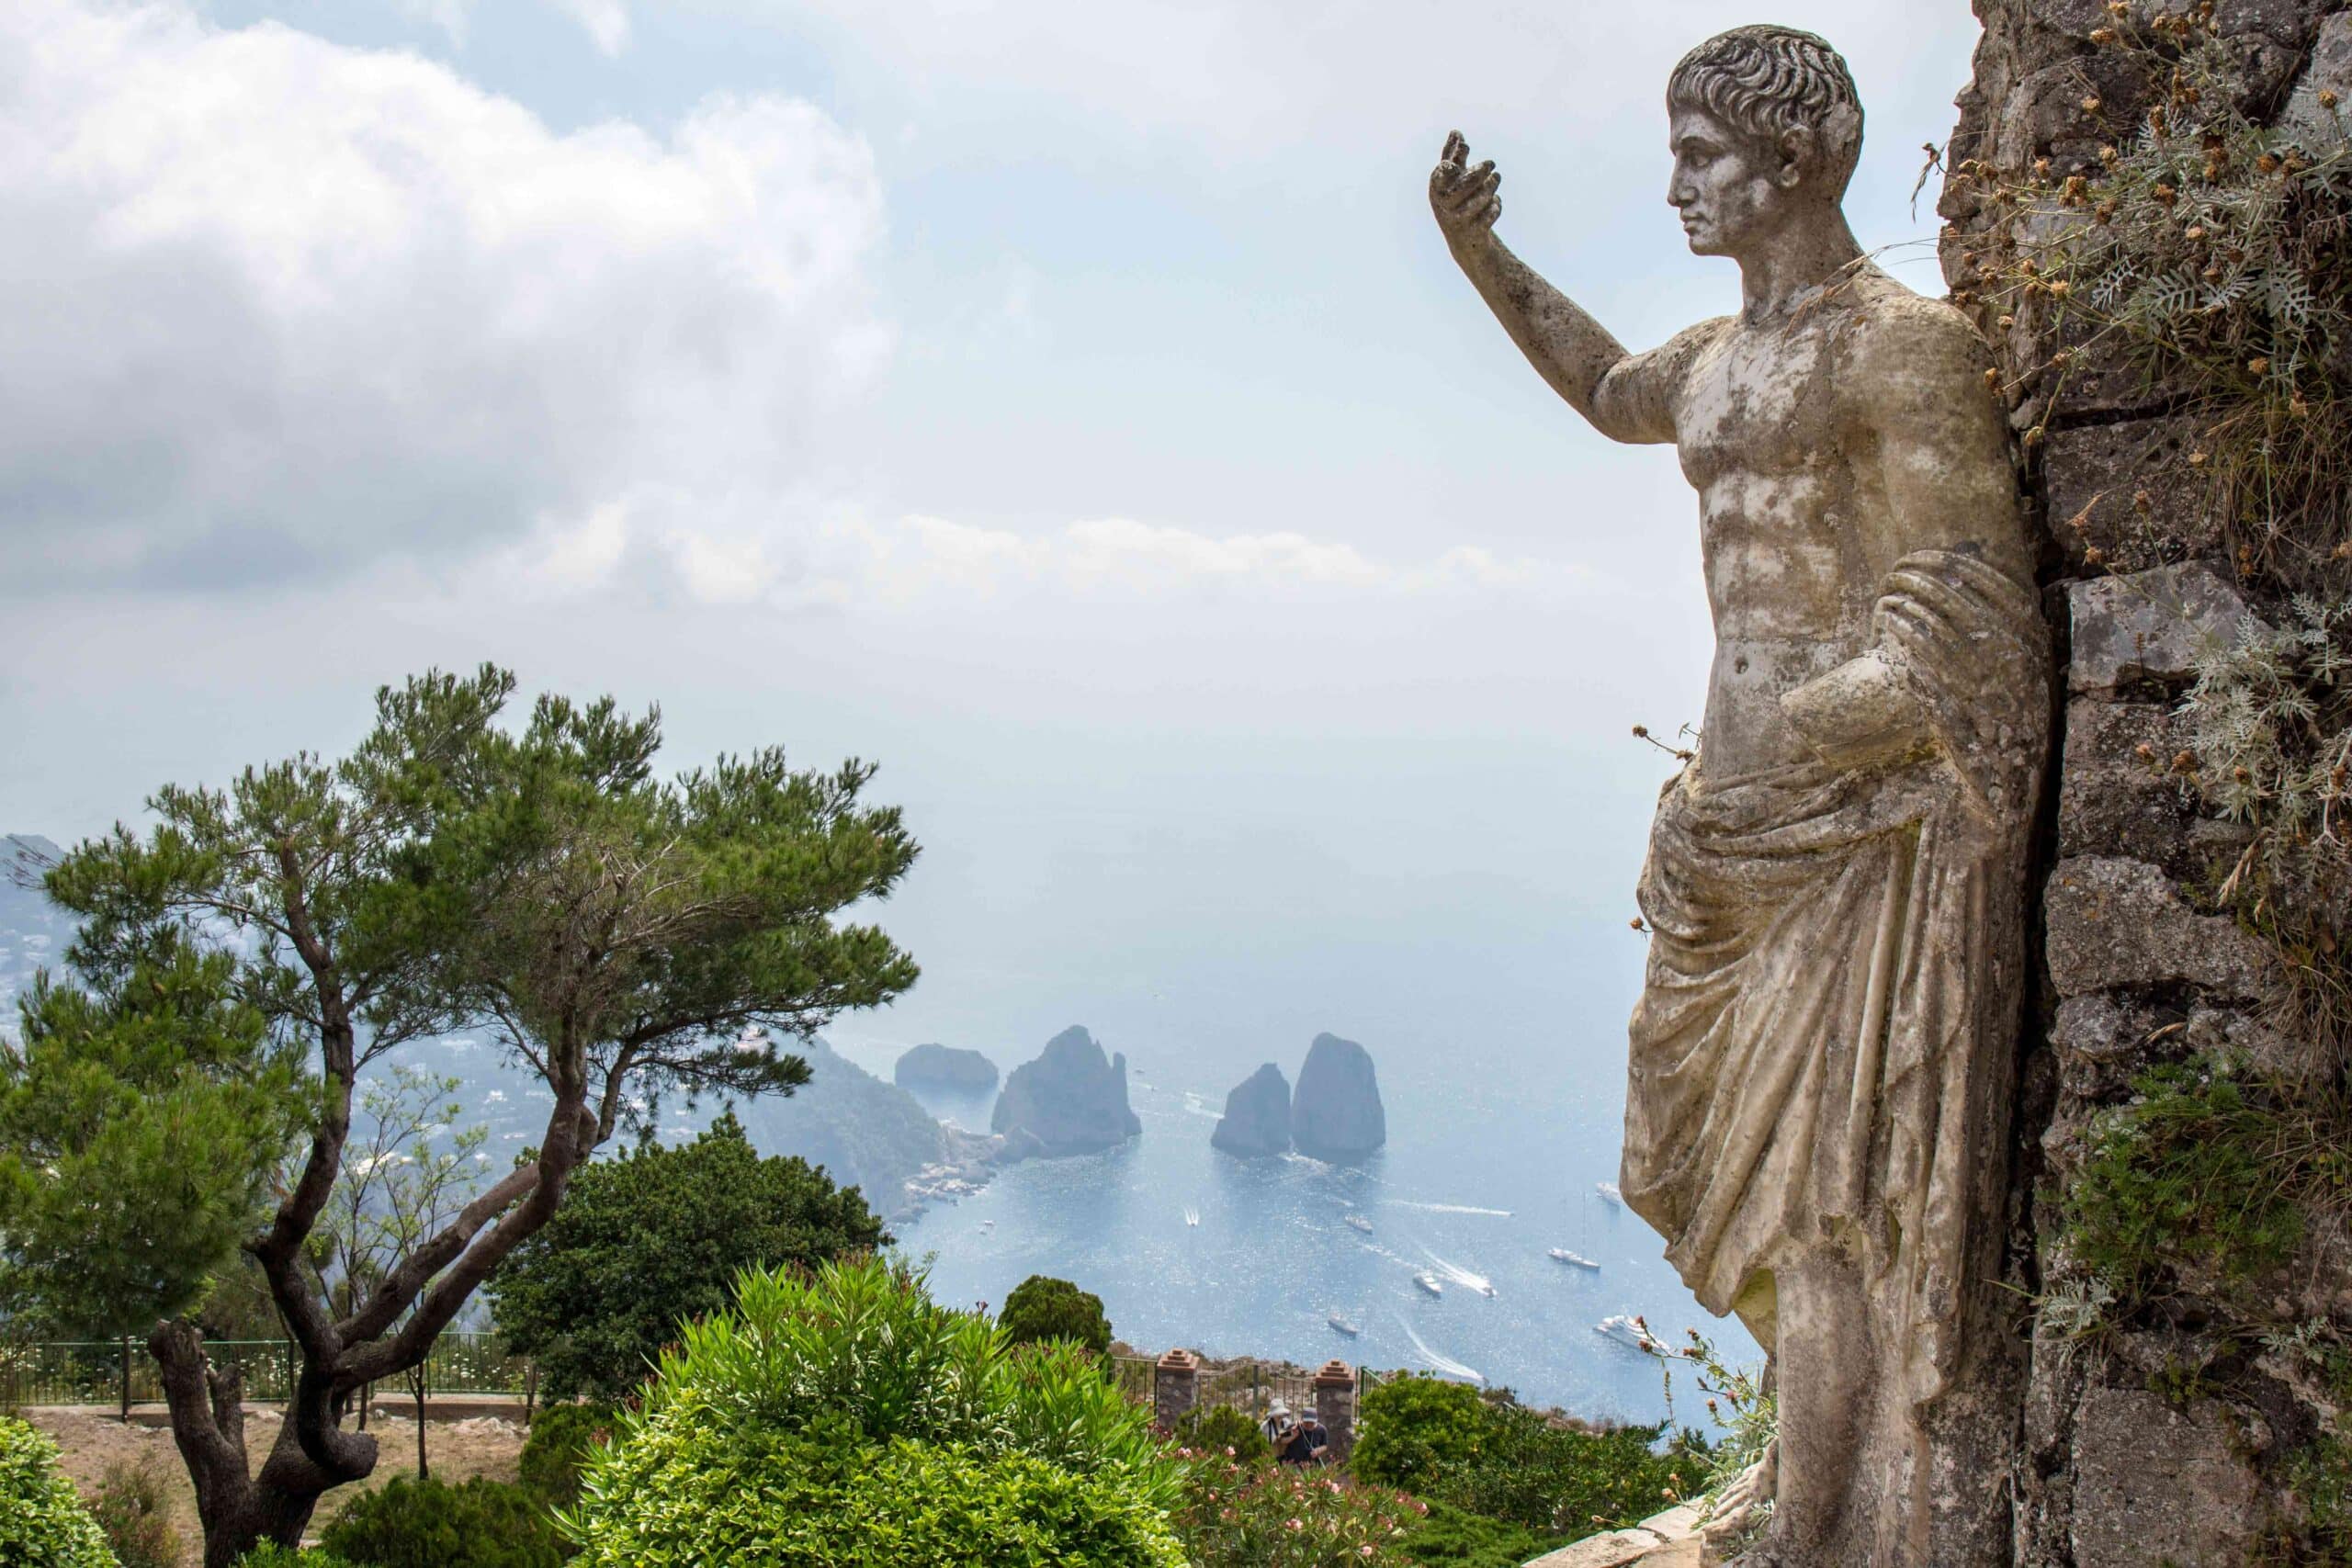 Capri View after chairlift with famous statue raising his hand